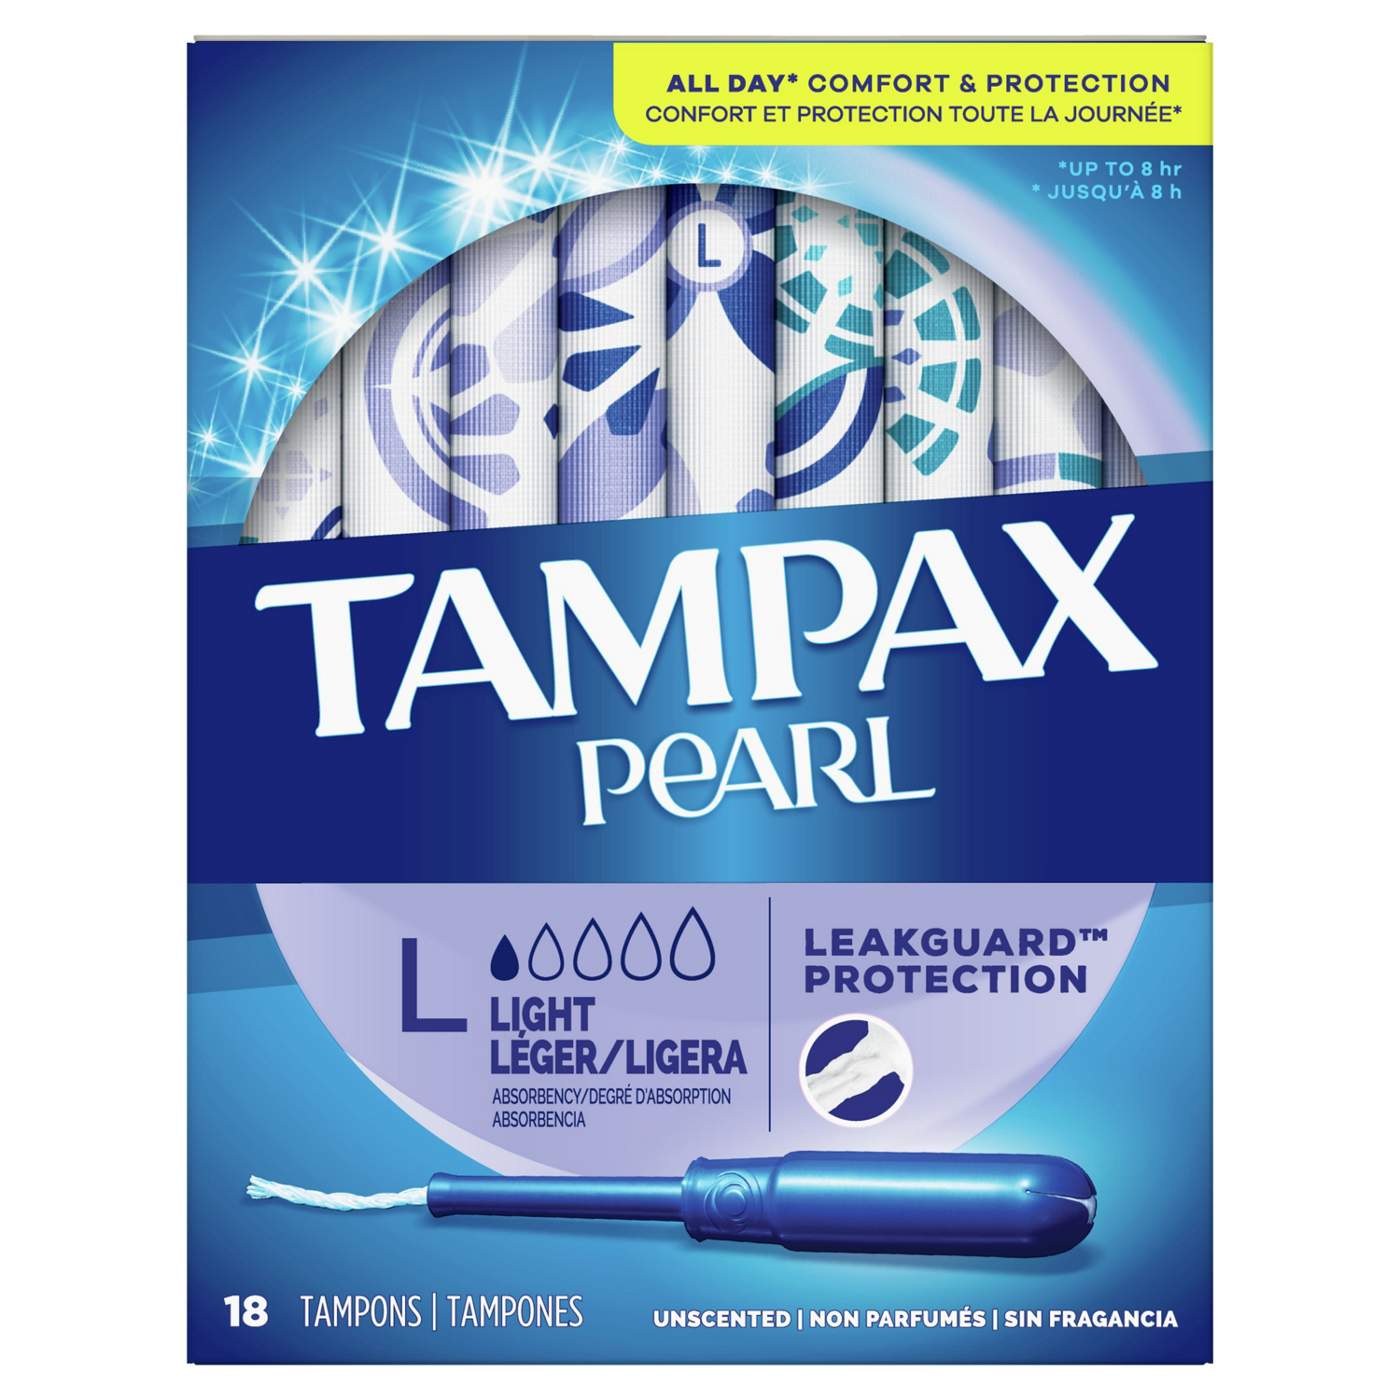 Tampax Pearl Tampons Light Unscented; image 1 of 3